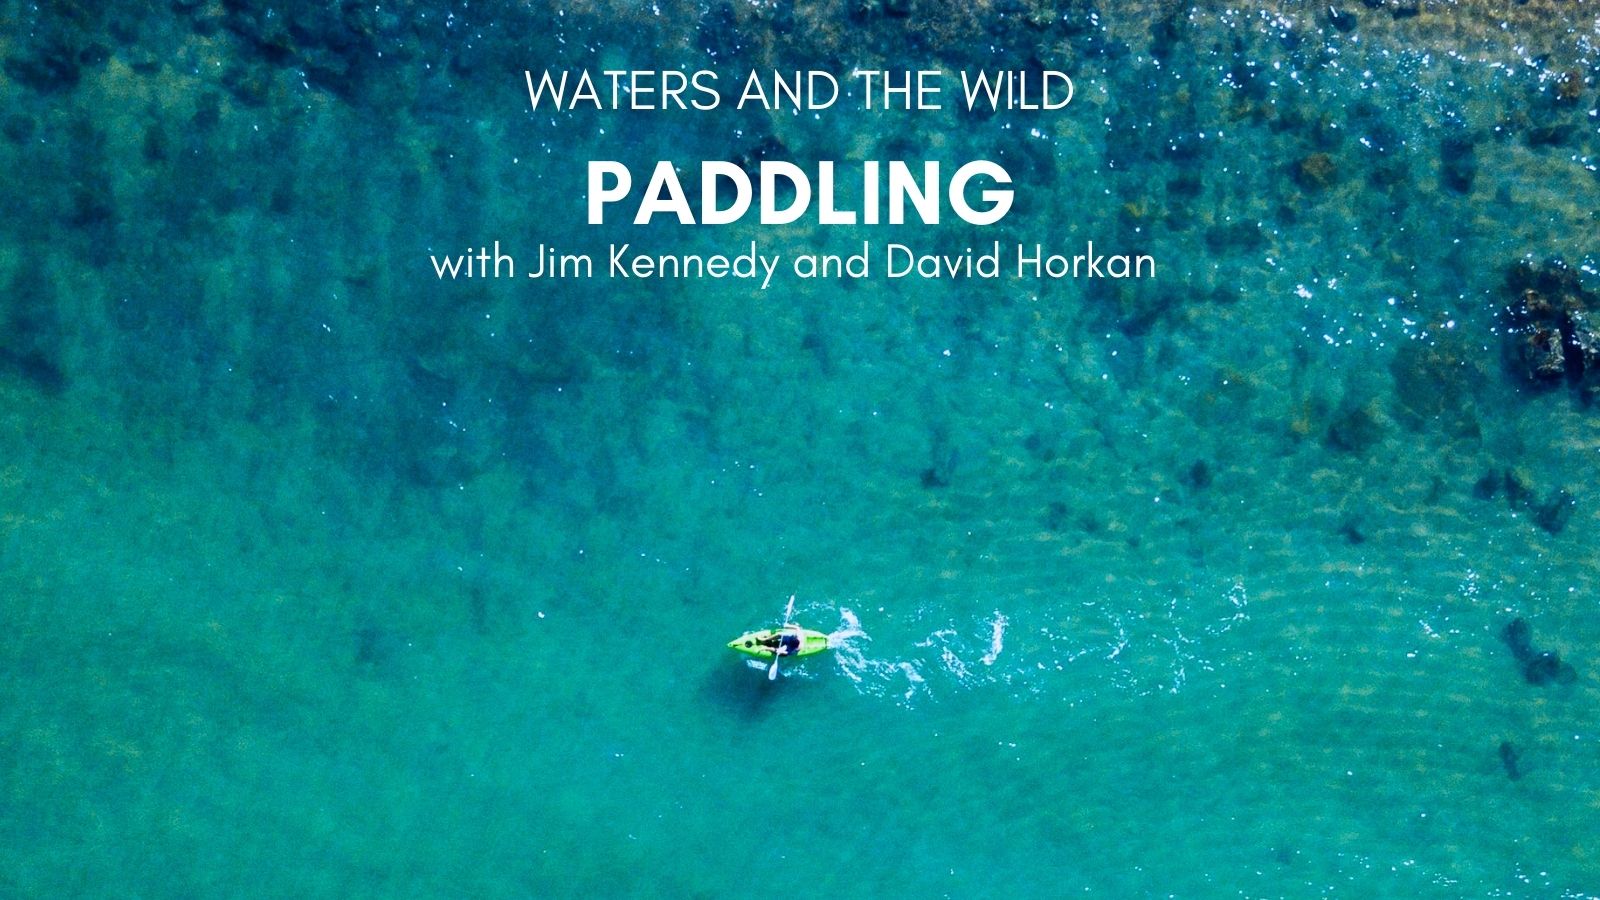 Waters and the Wild Webinar. Paddling with Jim Kennedy and David Horkan